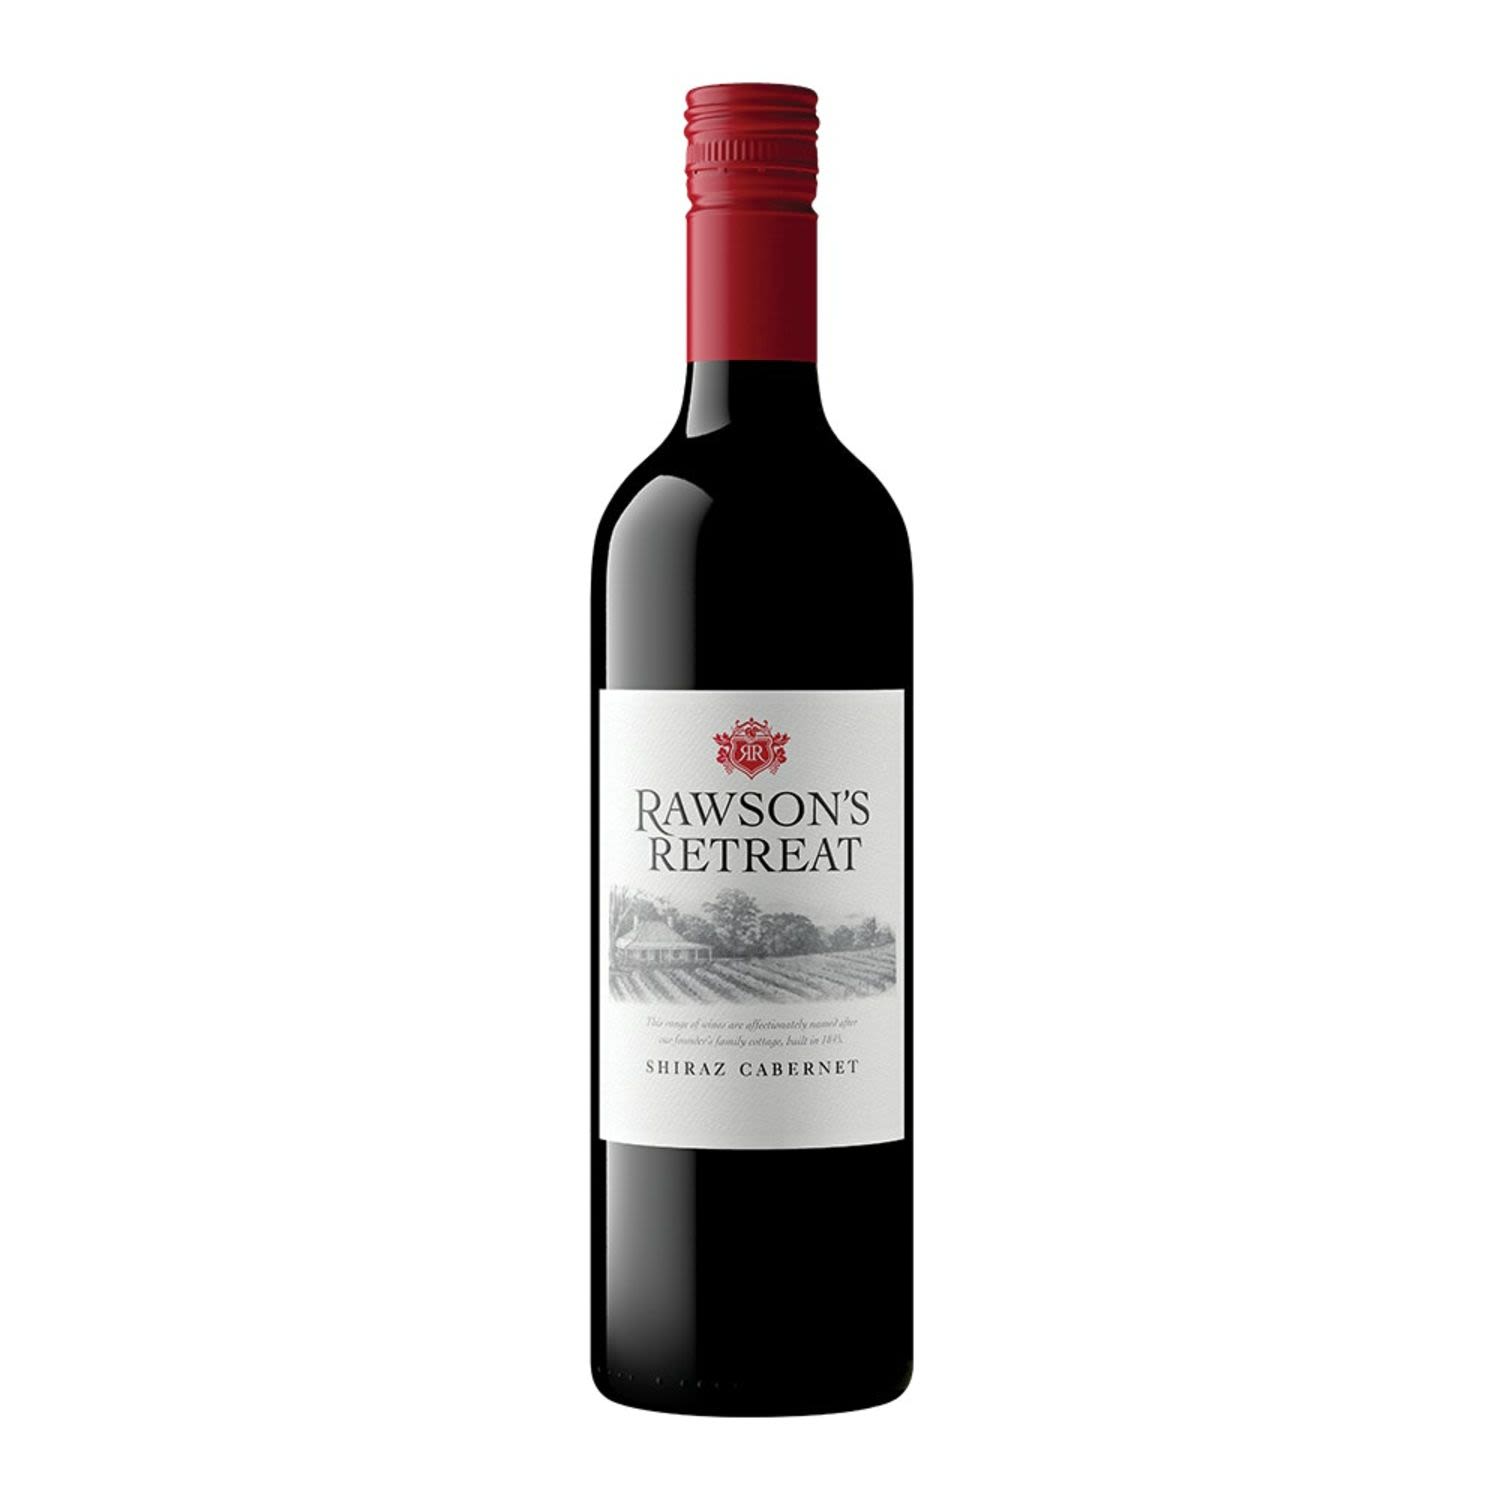 Lifted cherry & bramble berries are well supported with integrated spicy, cedary oak. Medium bodied style with fine, rounded tannins.<br /> <br />Alcohol Volume: 13.50%<br /><br />Pack Format: Bottle<br /><br />Standard Drinks: 8<br /><br />Pack Type: Bottle<br /><br />Country of Origin: Australia<br /><br />Region: South Eastern Australia<br /><br />Vintage: Vintages Vary<br />